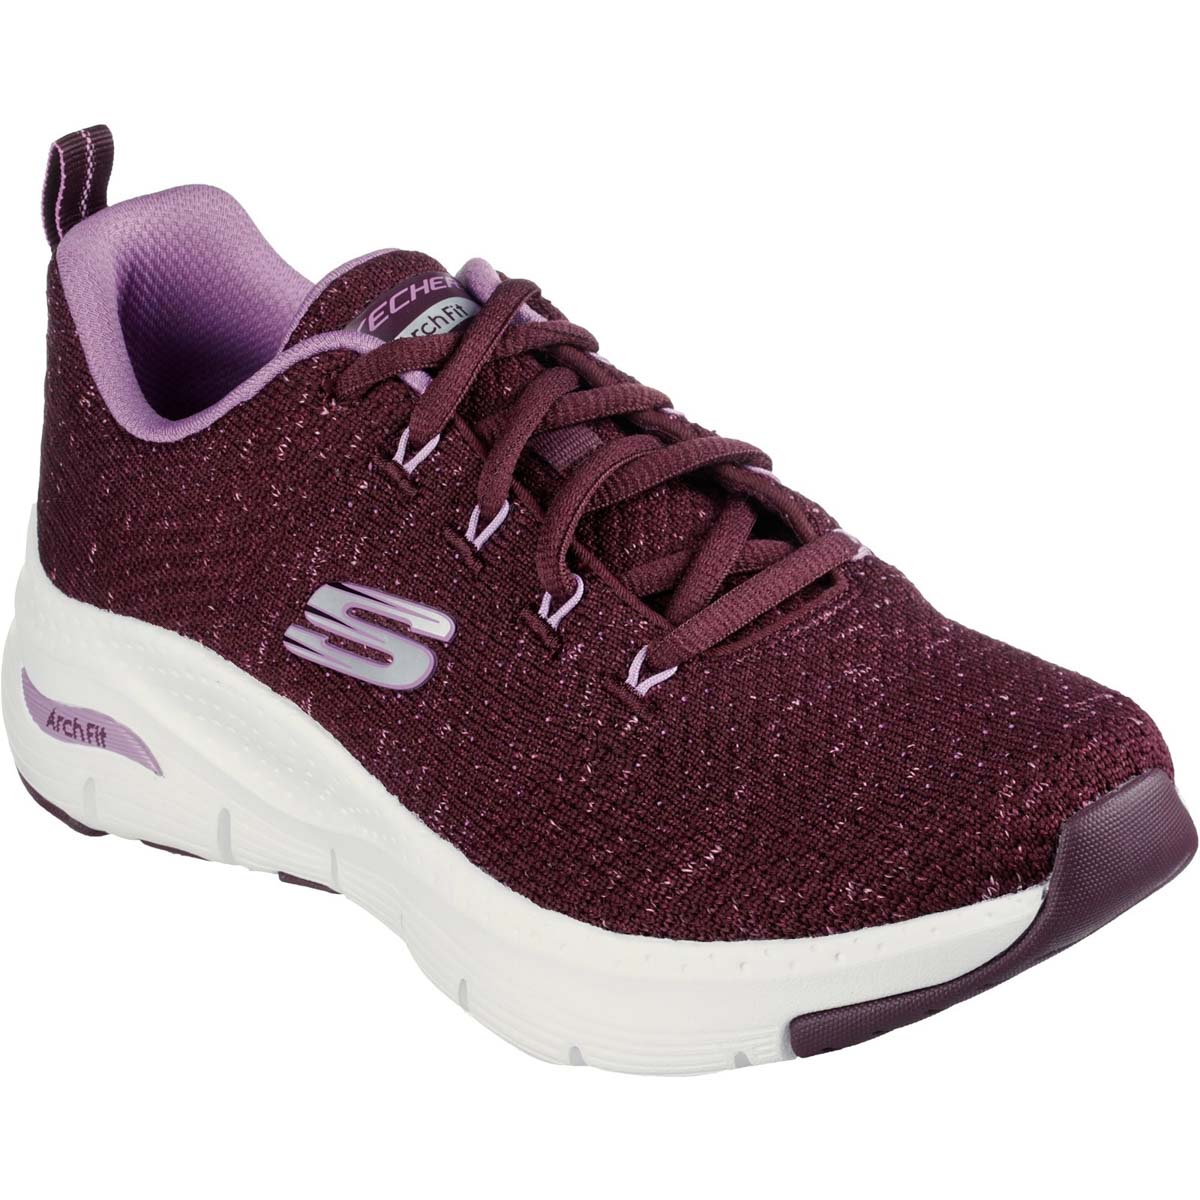 Skechers Arch Fit Glee For All Plum Womens Trainers 149713 In Size 5 In Plain Plum